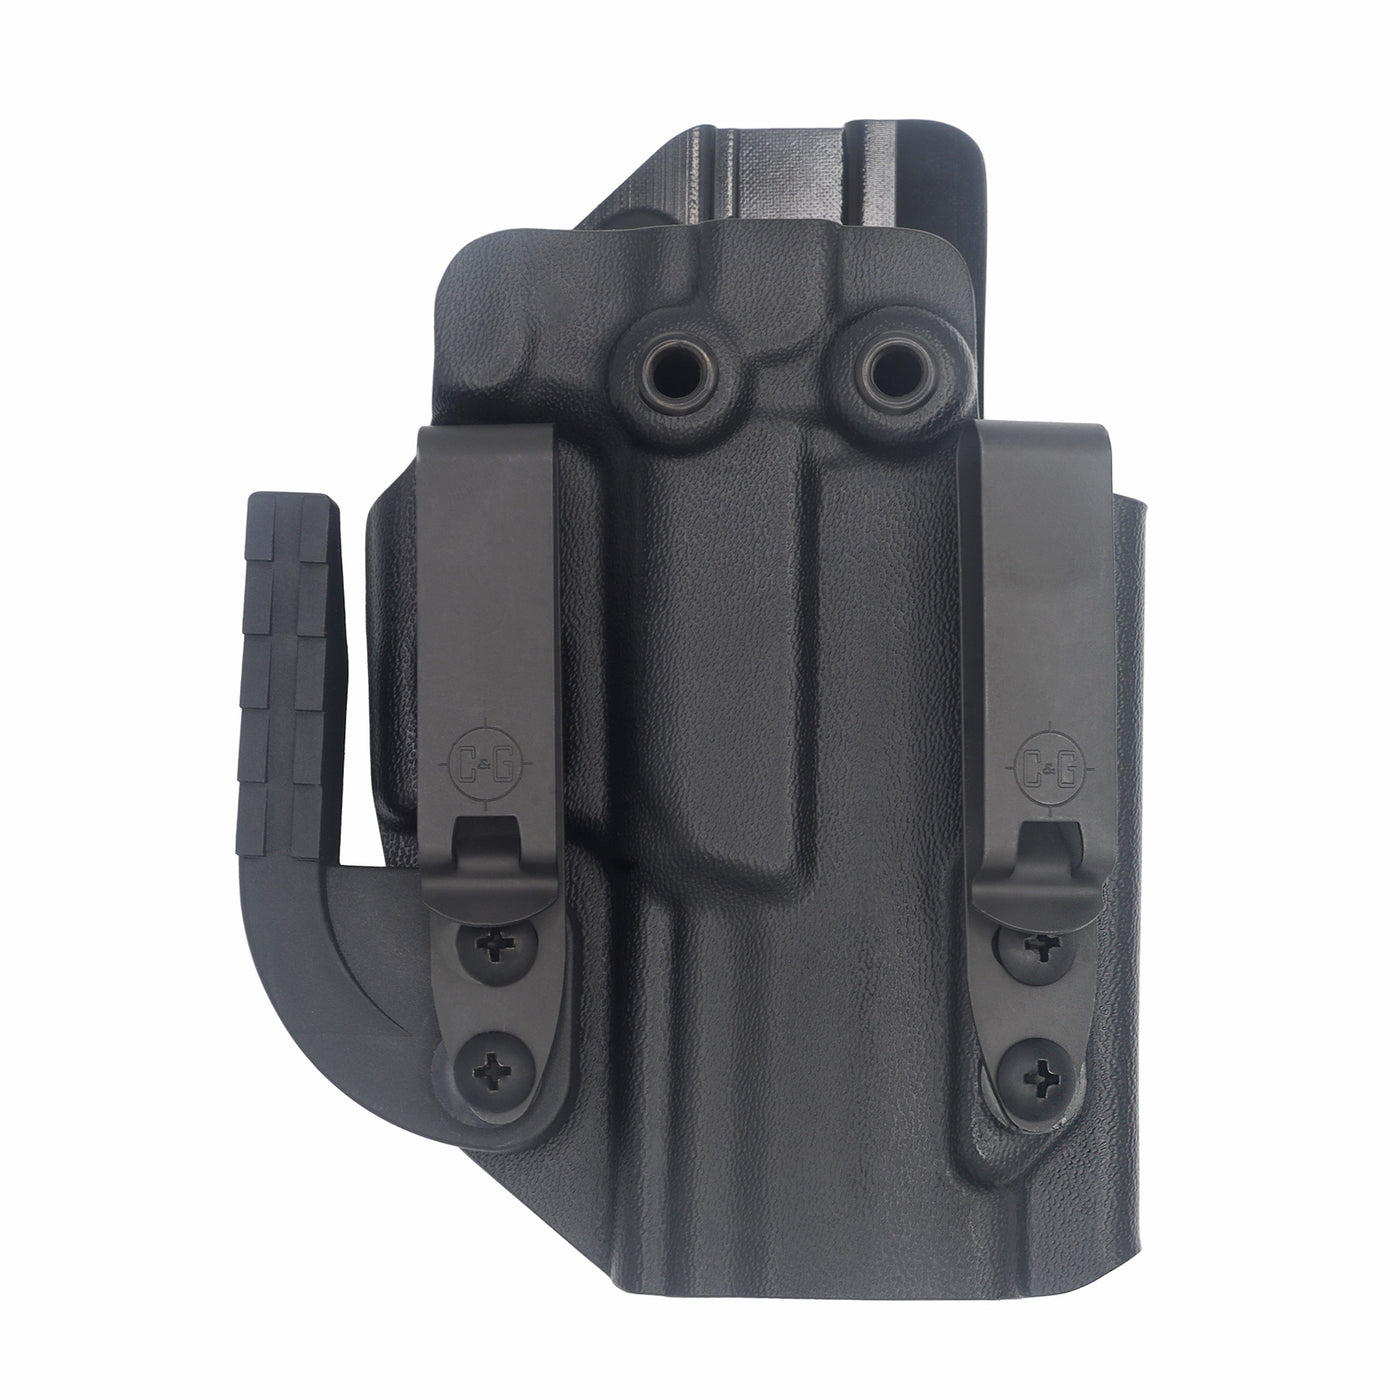 This is the Alpha upgraded quickship C&G Holsters inside the waistband holster for the Springfield XDm OSP Compact Dragonfly 3.6" with the Darkwing claw and DCC Mod4 clips.